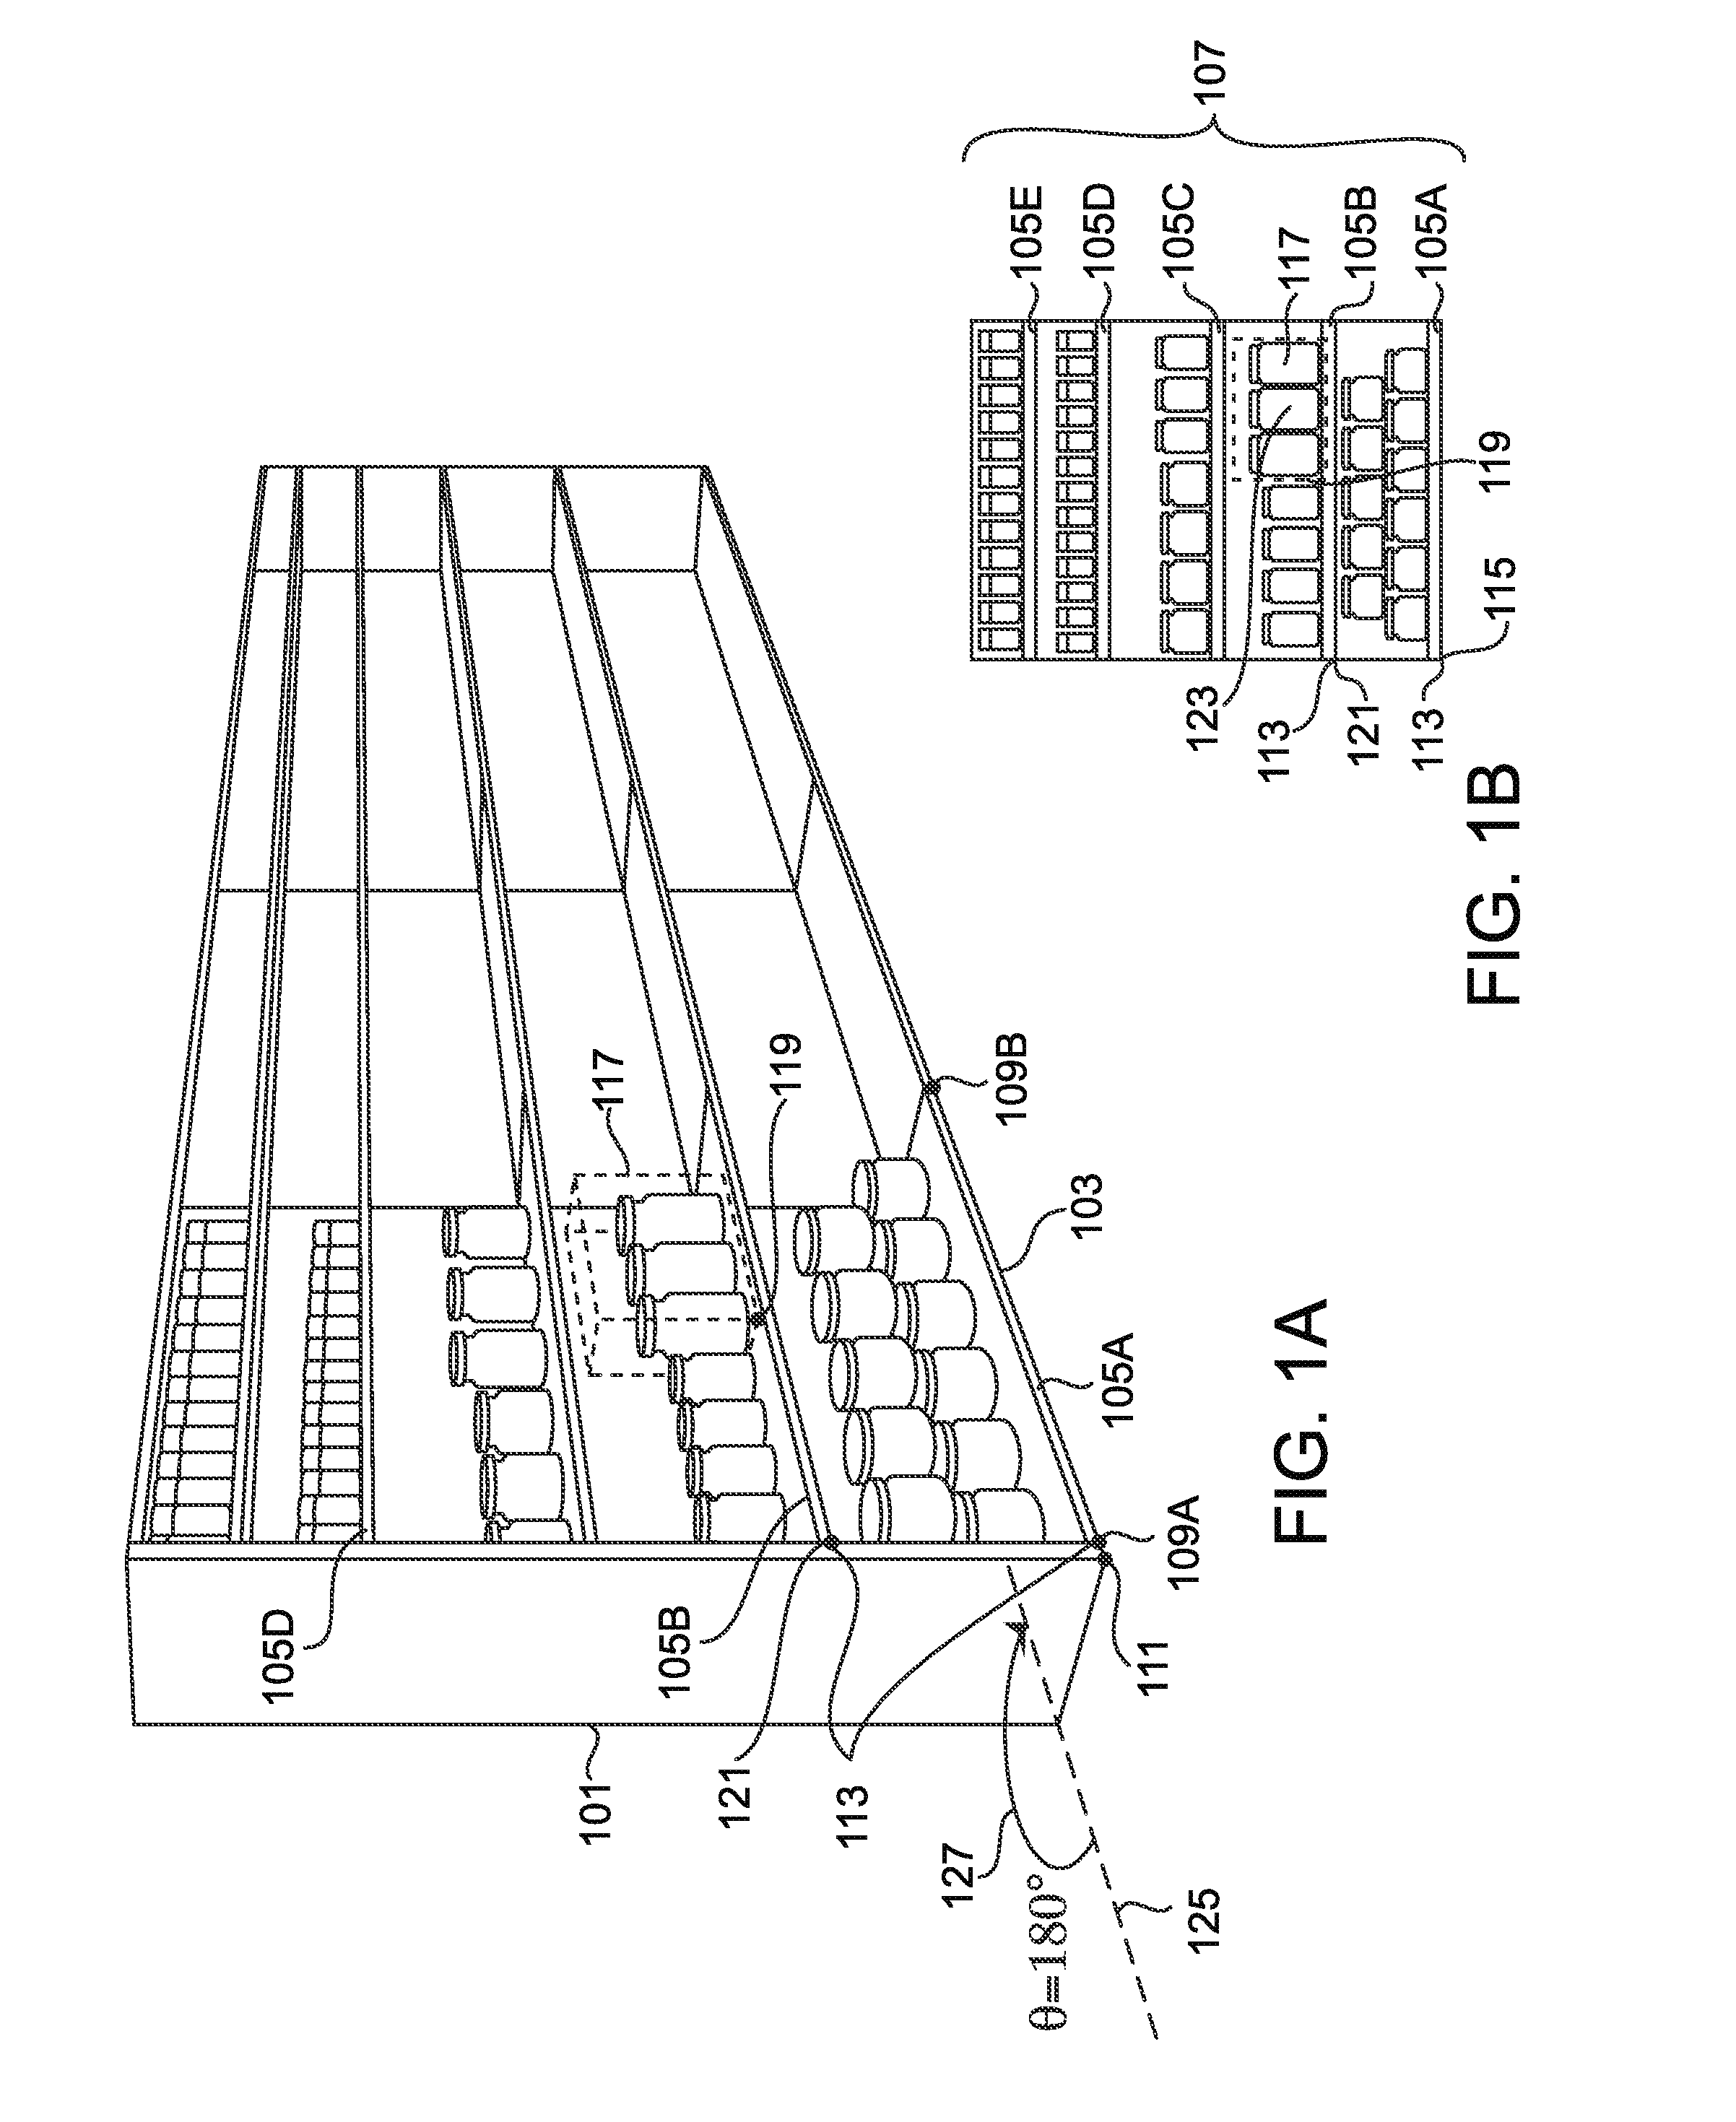 Systems and Methods for Displaying the Location of a Product in a Retail Location